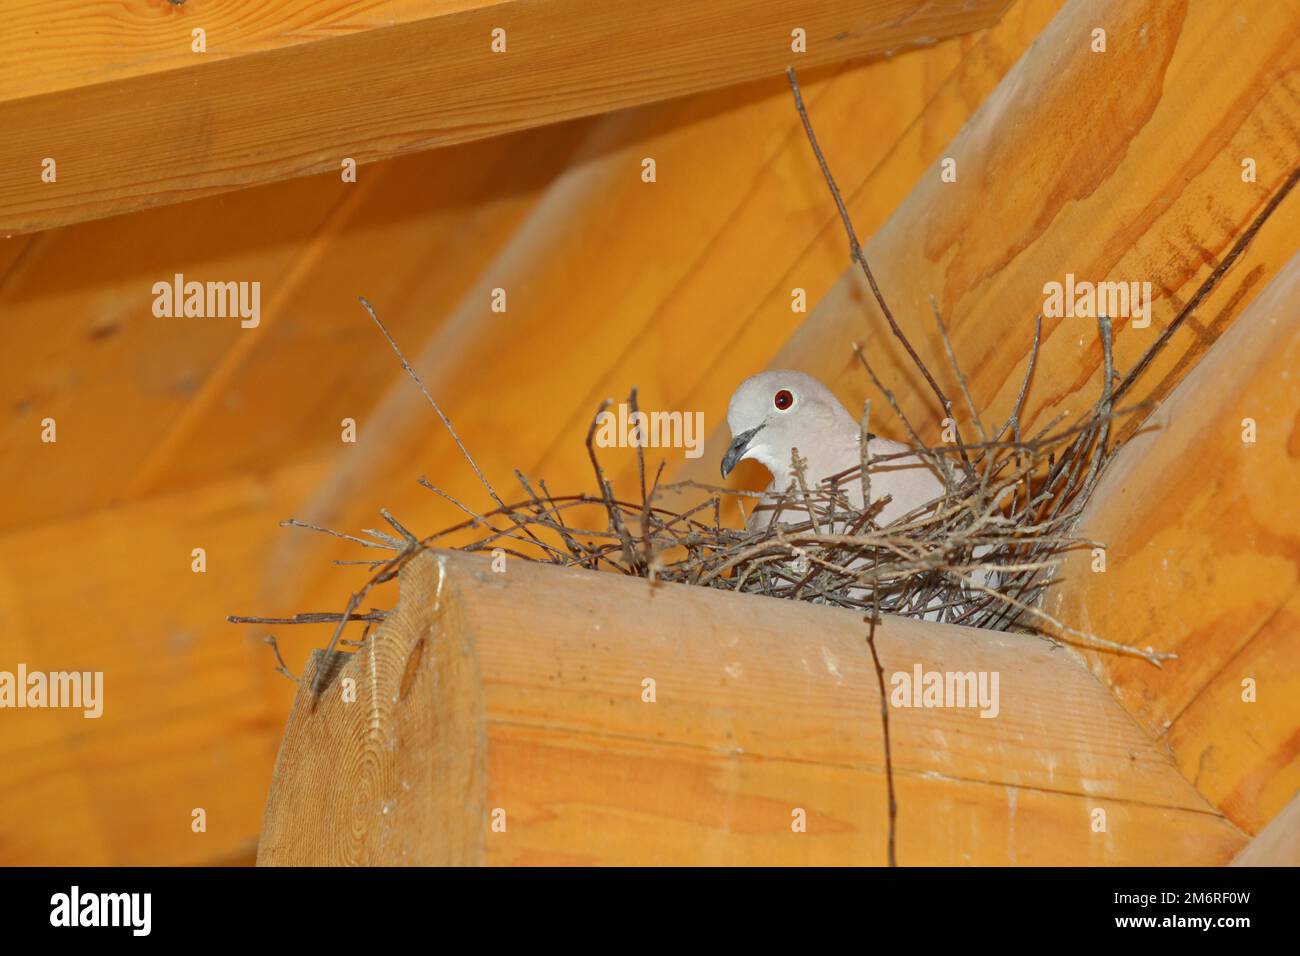 Eurasian Collared Dove (Streptopelia decaocto) in the nest on the beam of a wooden house, Bavaria, Germany Stock Photo